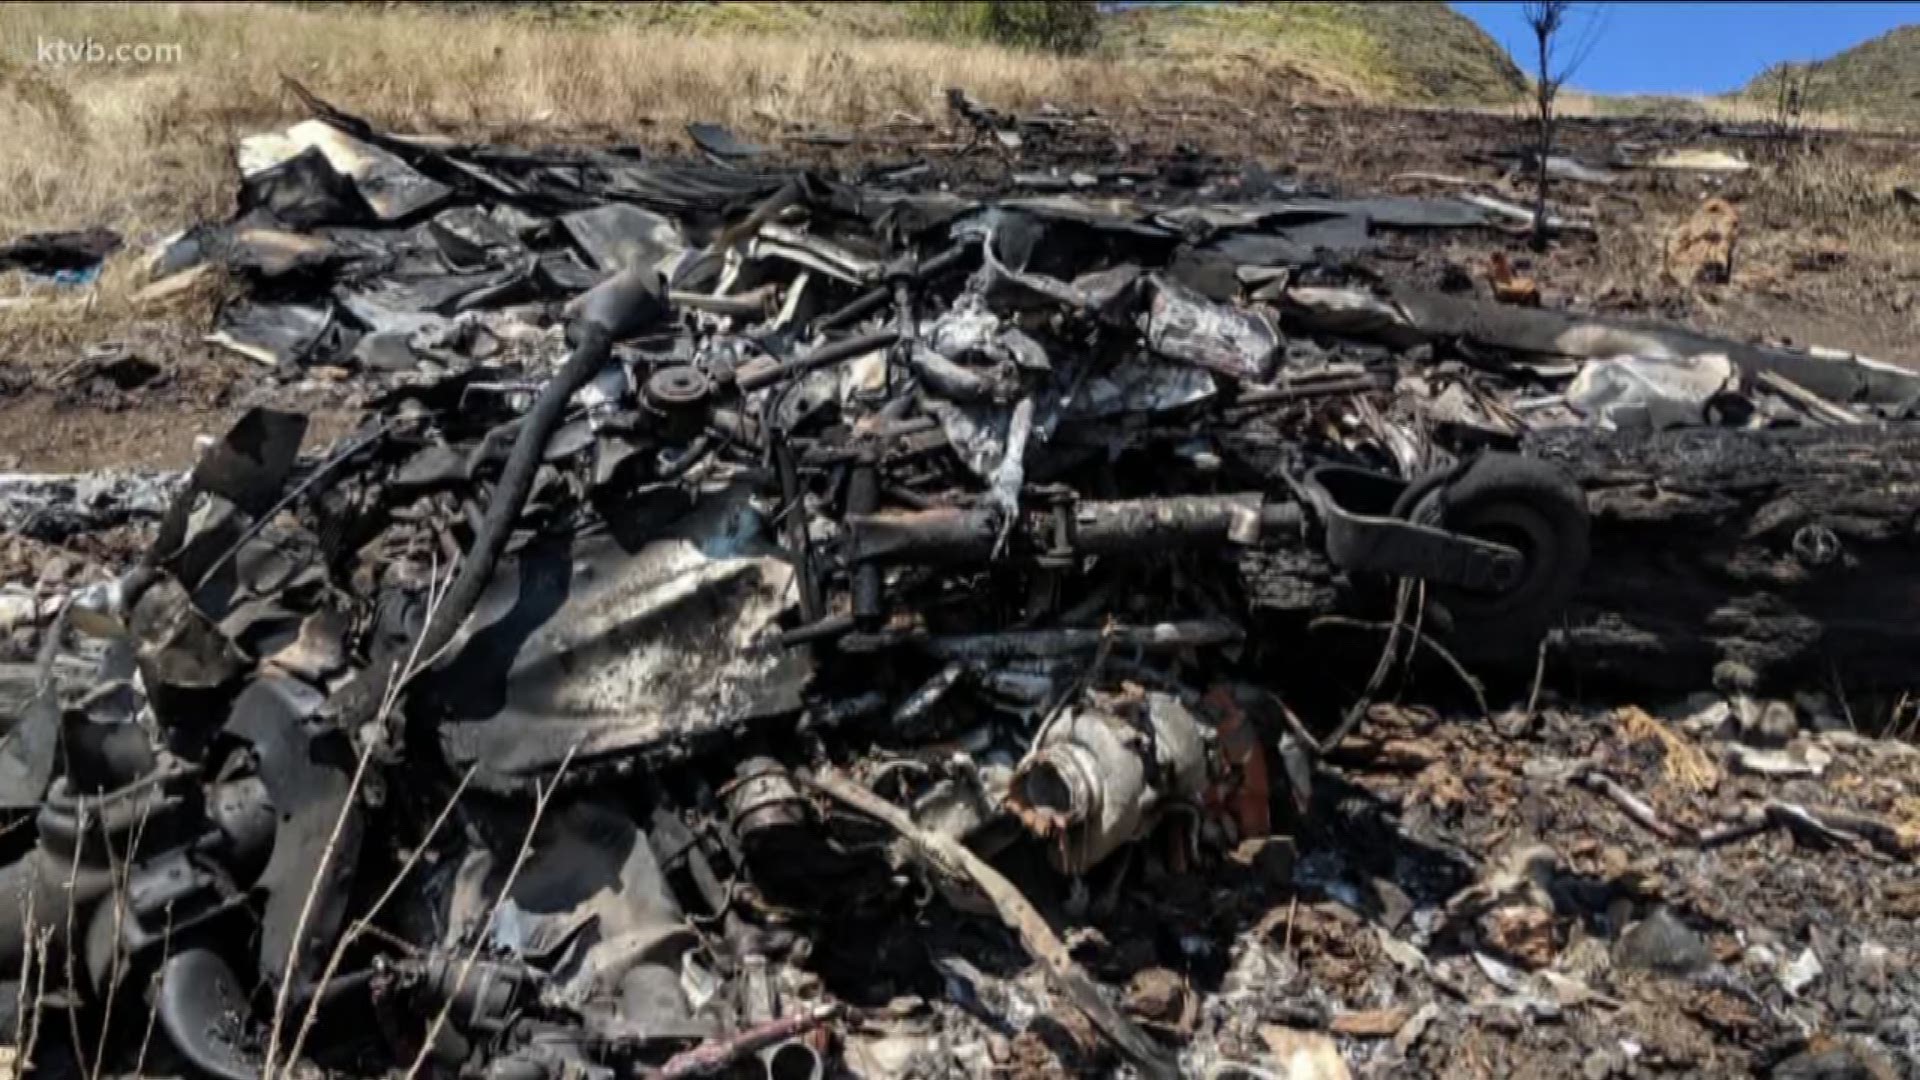 Idaho County Sheriff Doug Giddings says it's not yet known why the plane crashed, but it apparently burst into flames and was destroyed on impact. Giddings says the wreckage has made it hard for authorities to tell if there were any other people on board.